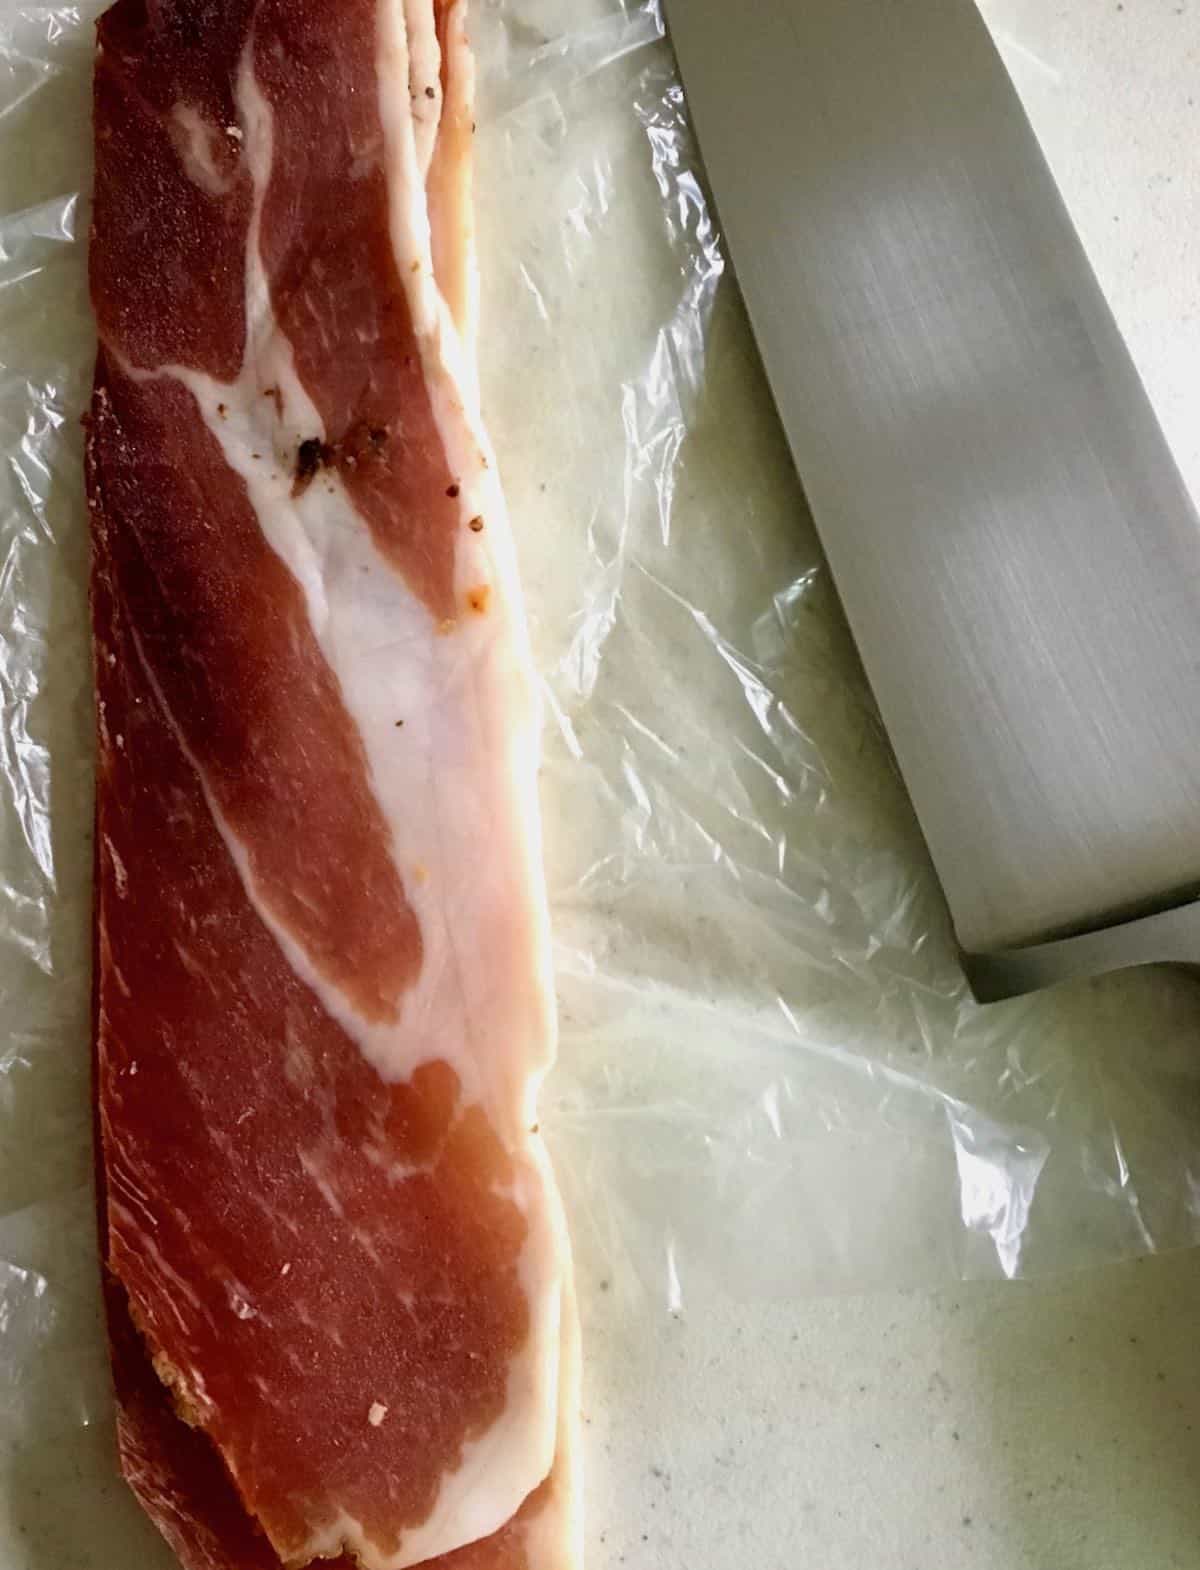 Speck and a knife.